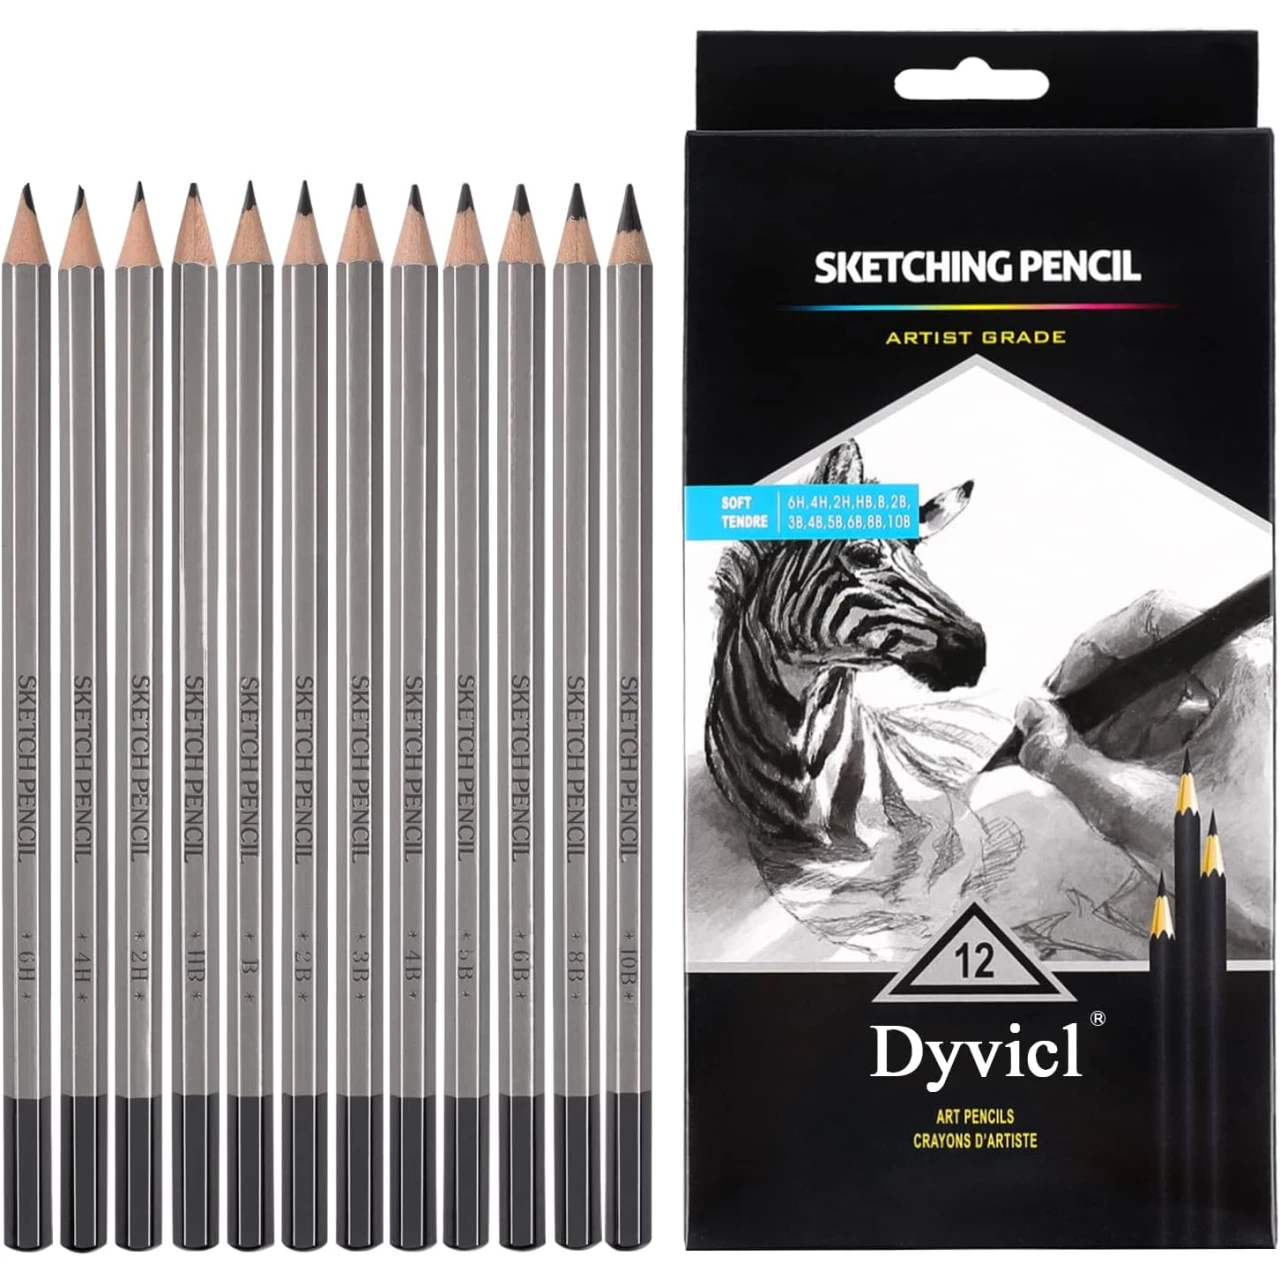 Dyvicl Professional Drawing Sketching Pencil Set - 12 Pieces Drawing Pencils